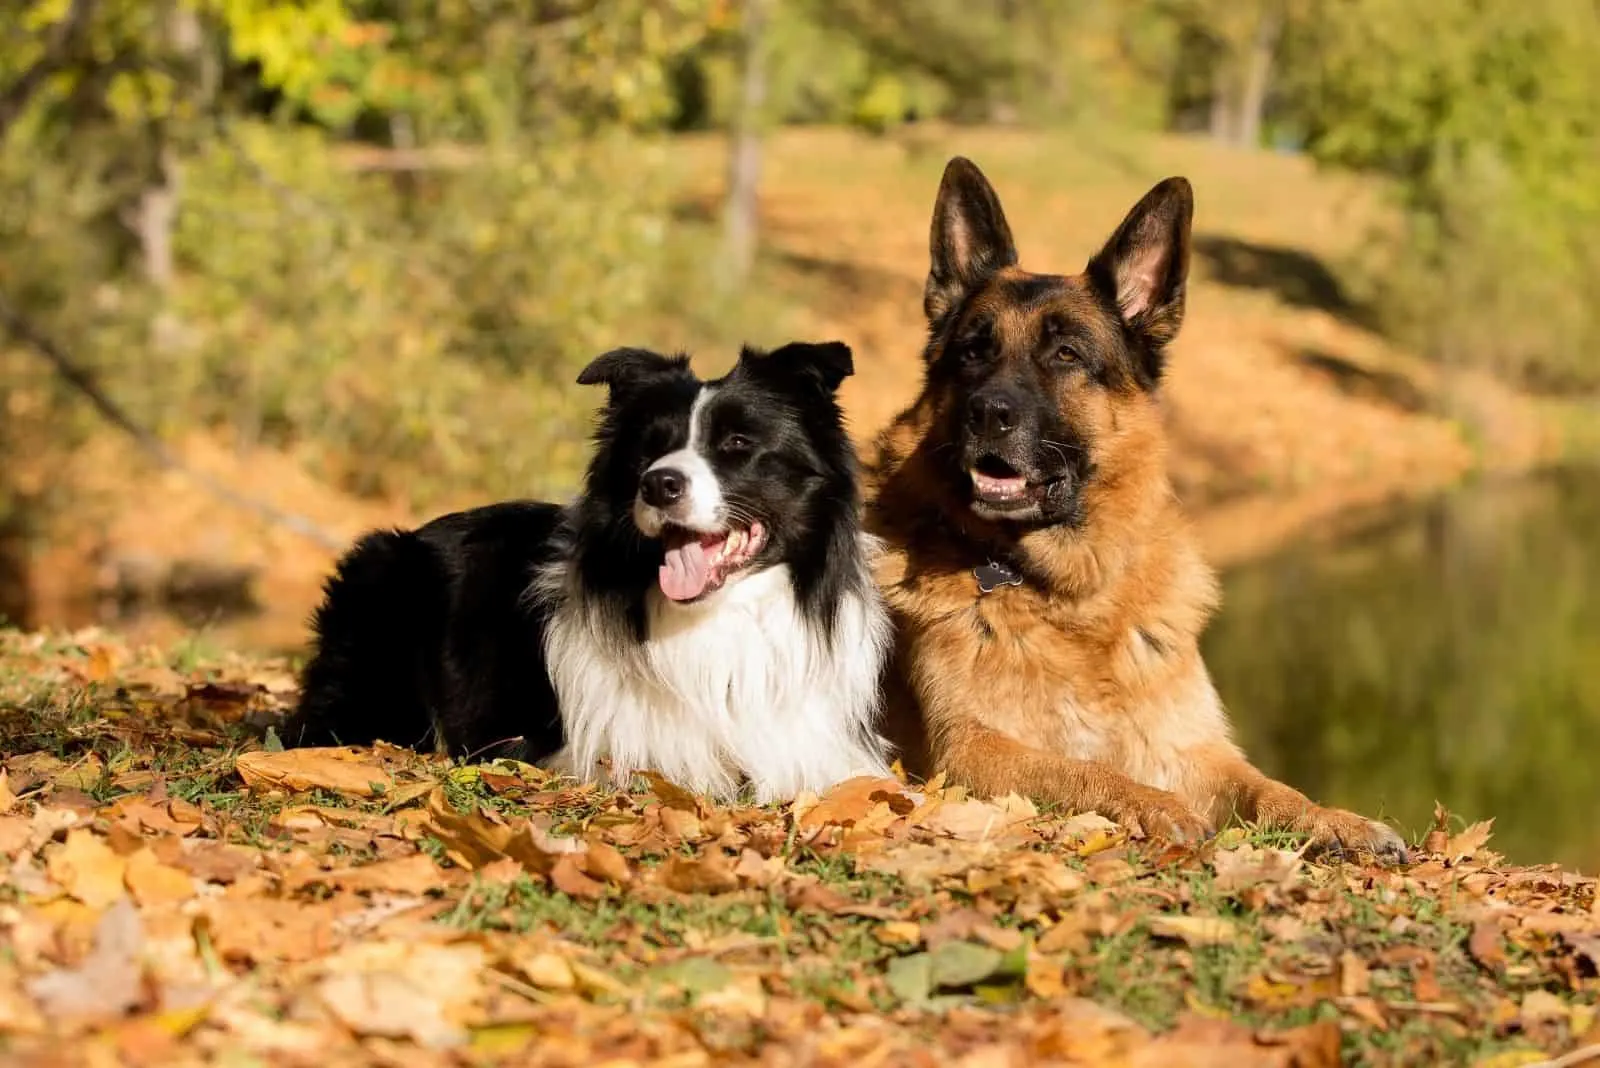 german shepherd and border collie lying down in an autumn forest